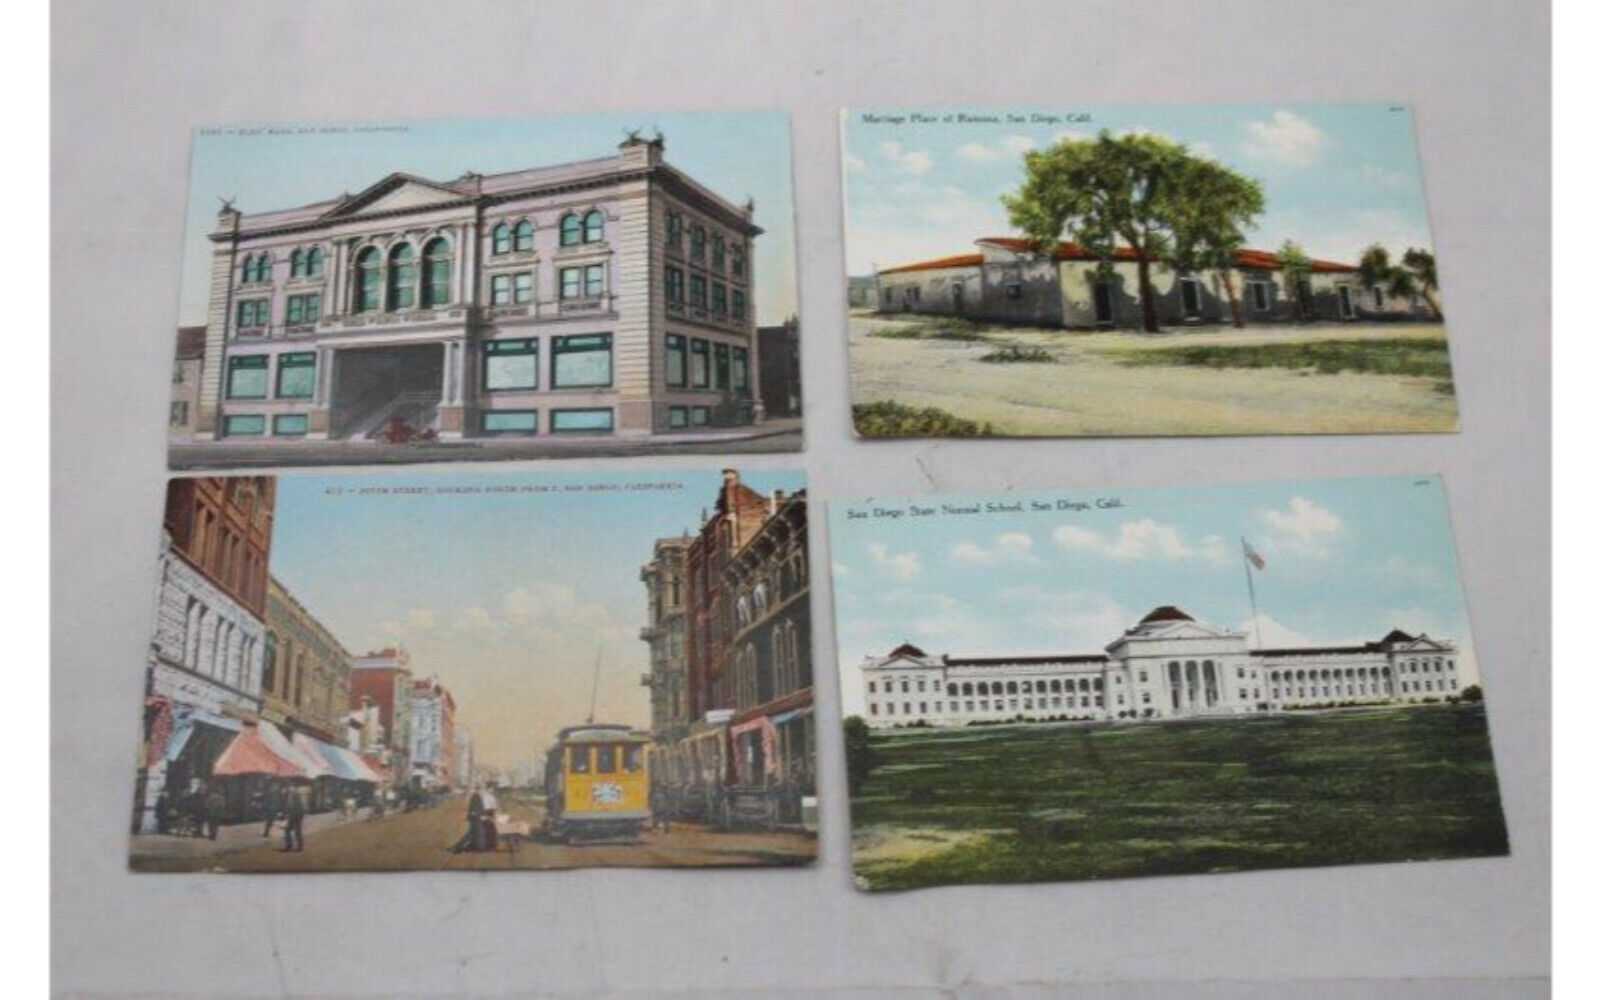 4 Postcards San Diego California Early 1900's Vintage Post Card 5th Street